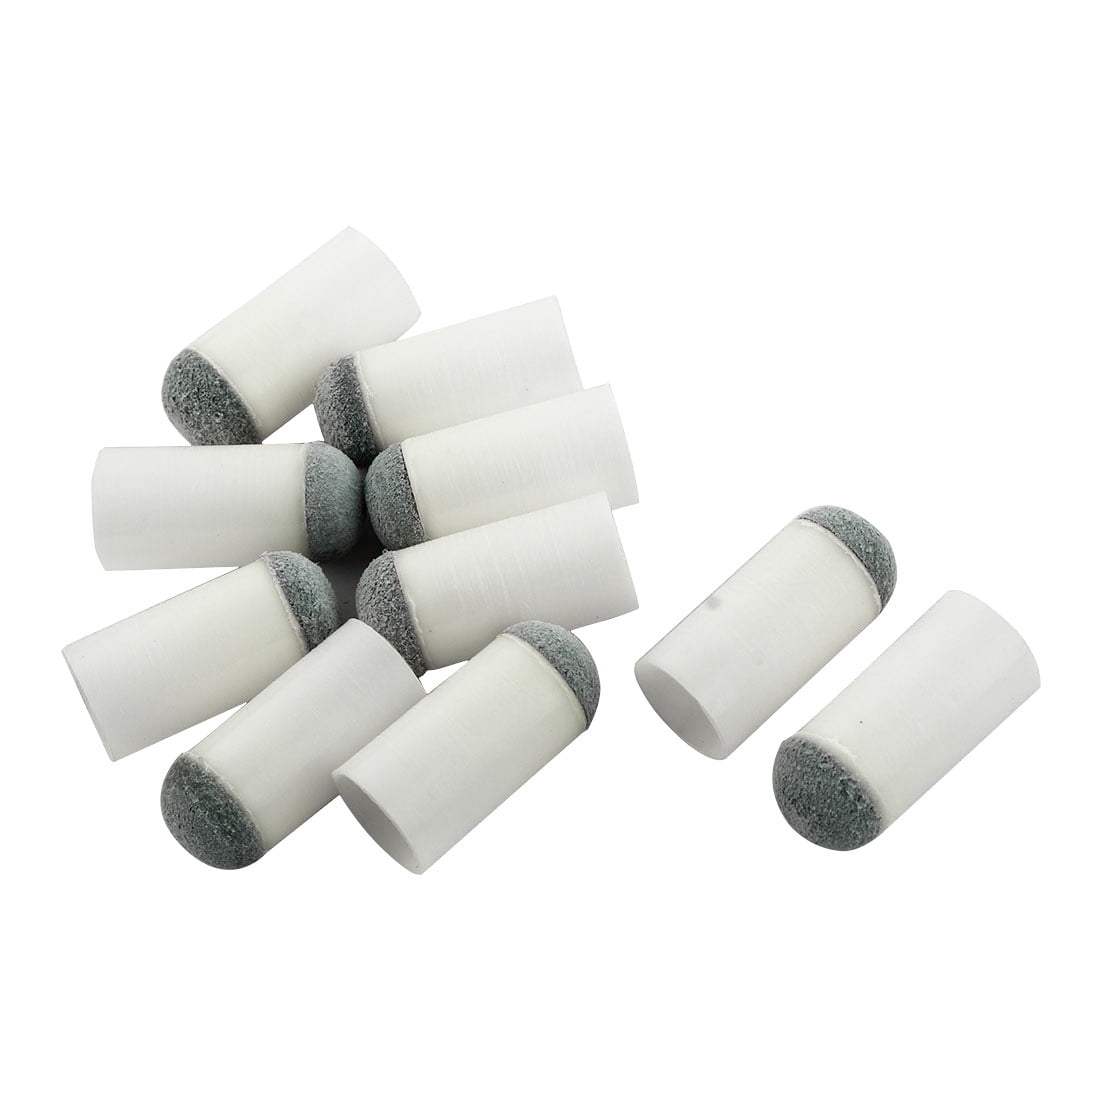 Pro 100pcs Slip On Push On Billiards Snooker Pool Cue Stick Replacement Tips 